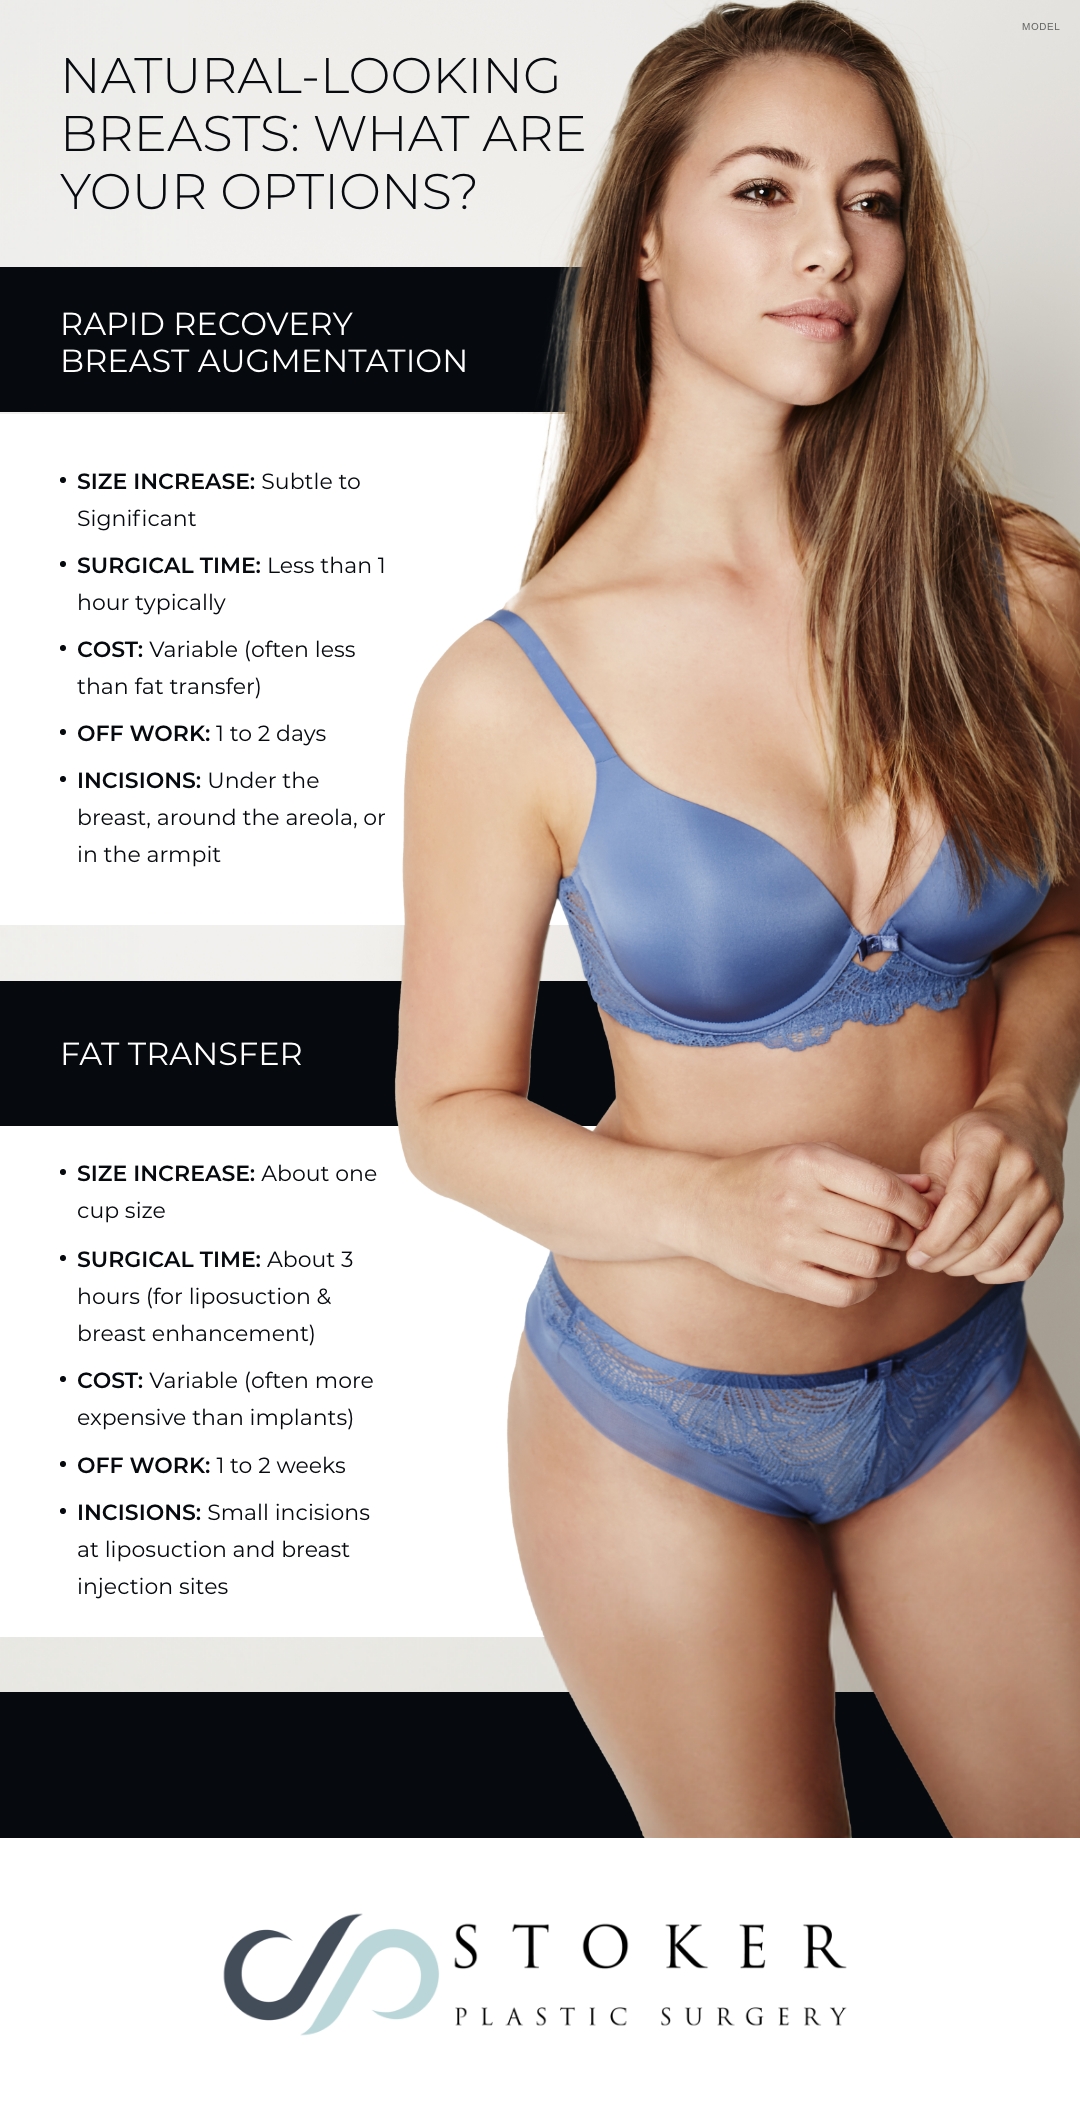 Dr. Sarah Mess - Fat transfer creates beautiful breasts that look and feel  natural. So if you don't want implants but wish your small B cup was a full C  cup, fat